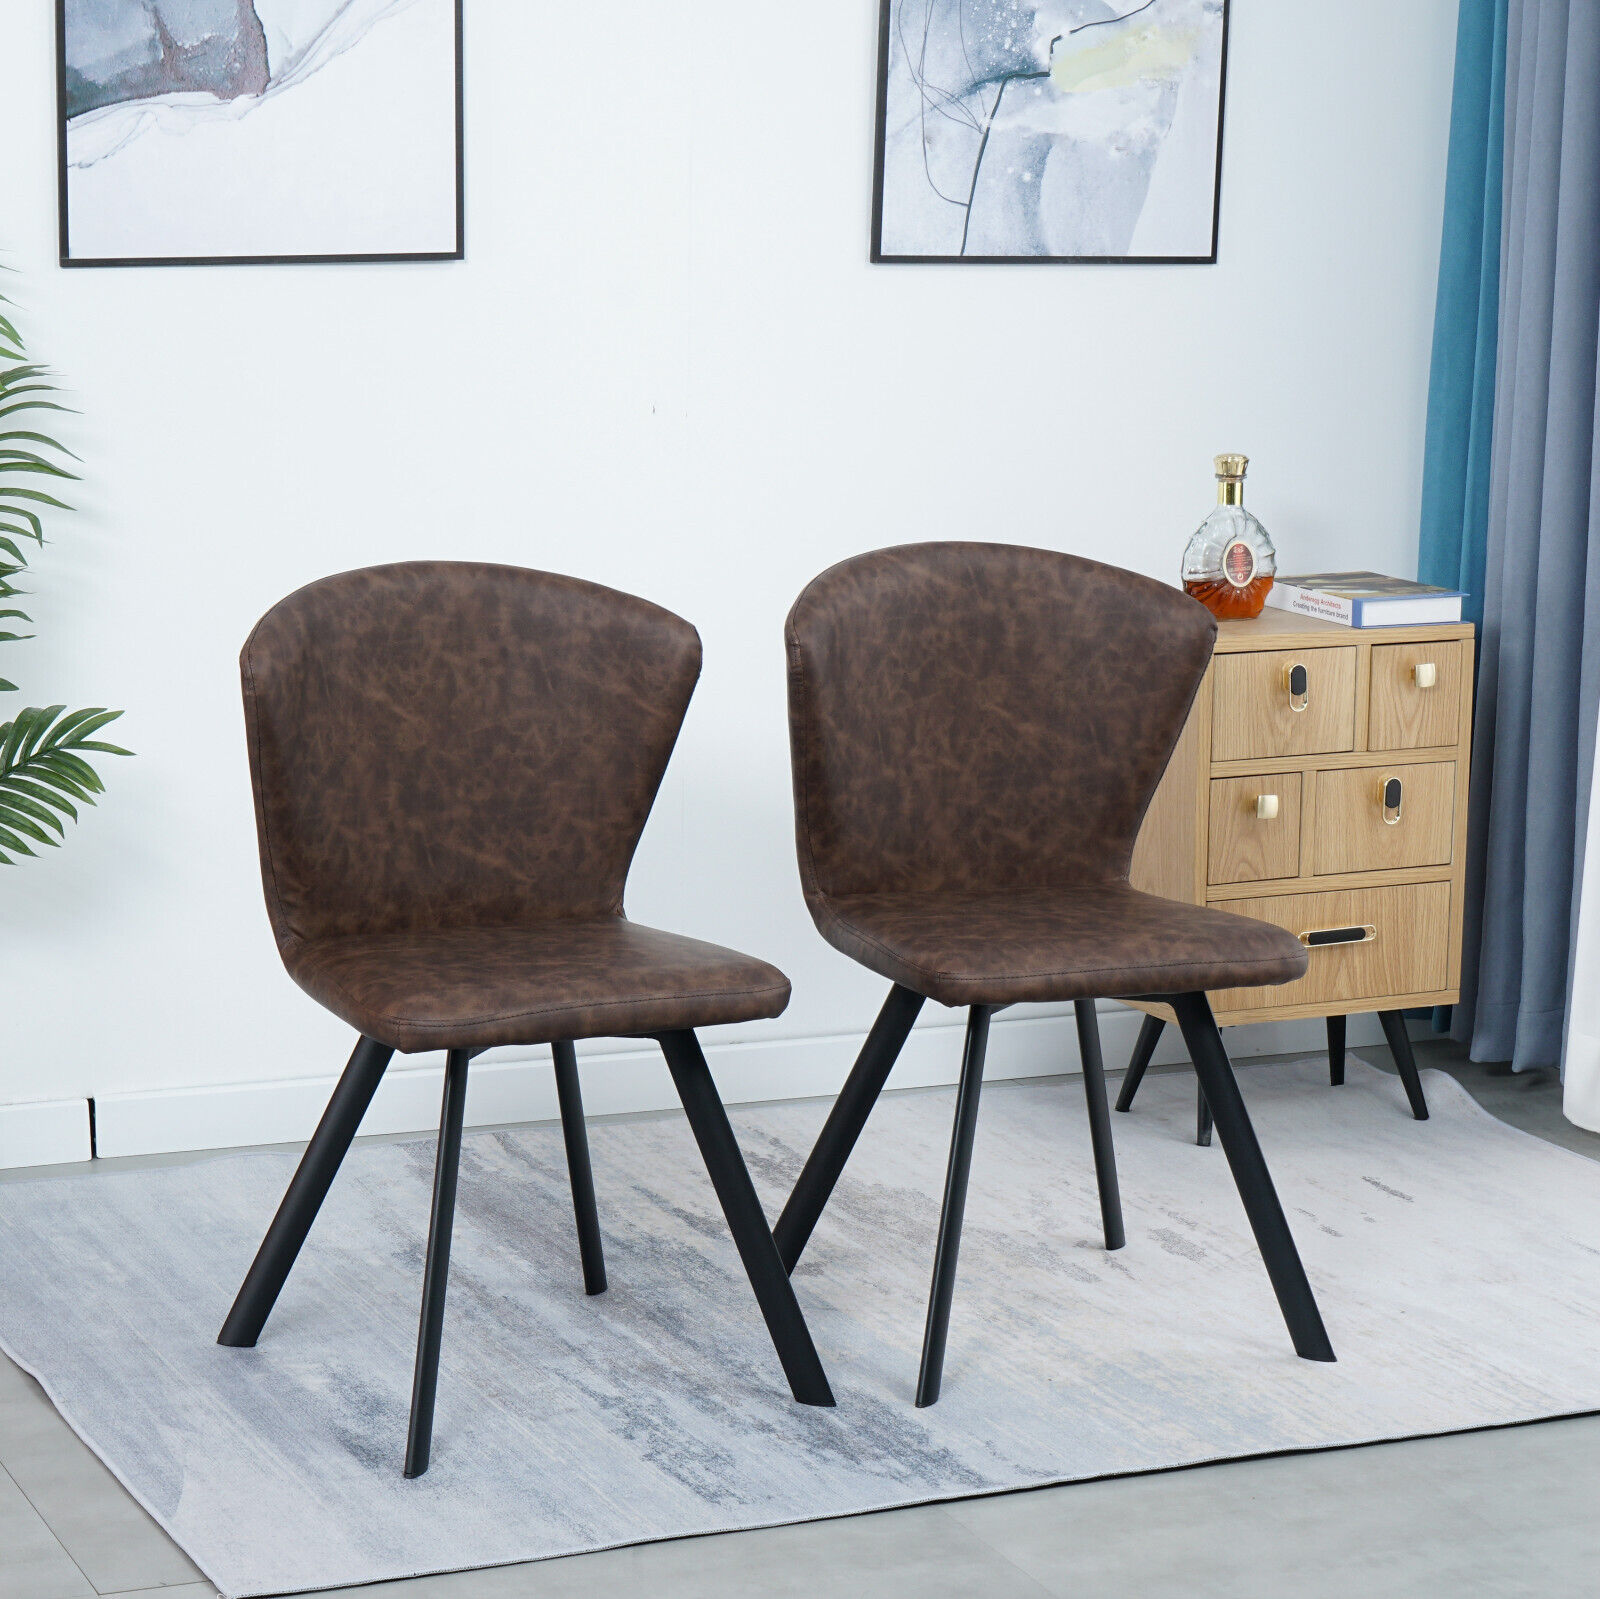 Set of 2 Modern luxury furniture chairs PU dining chair for dining room |